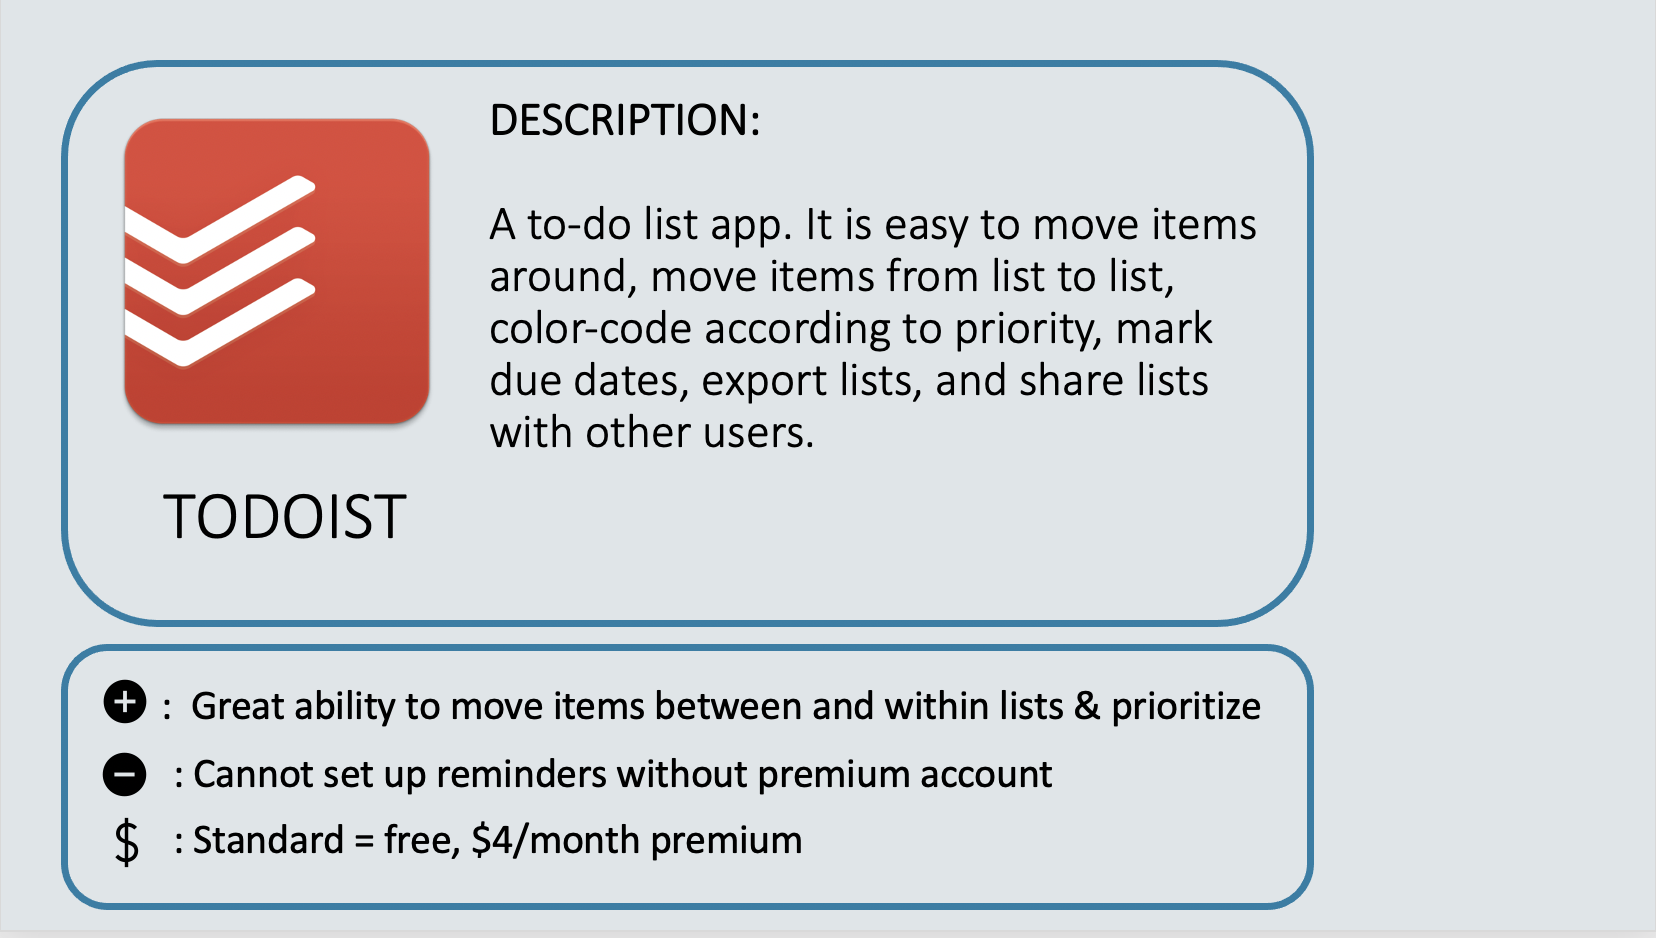 TODOIST - A to-do list app. It is easy to move items around, move items from list to list, color-code according to priority, mark due dates, export lists, and share lists with other users. Positive: Great ability to move items between and within lists & prioritize. Negative: Cannot set up reminders without premium account. Cost: Standard = free, $4 per month Premium